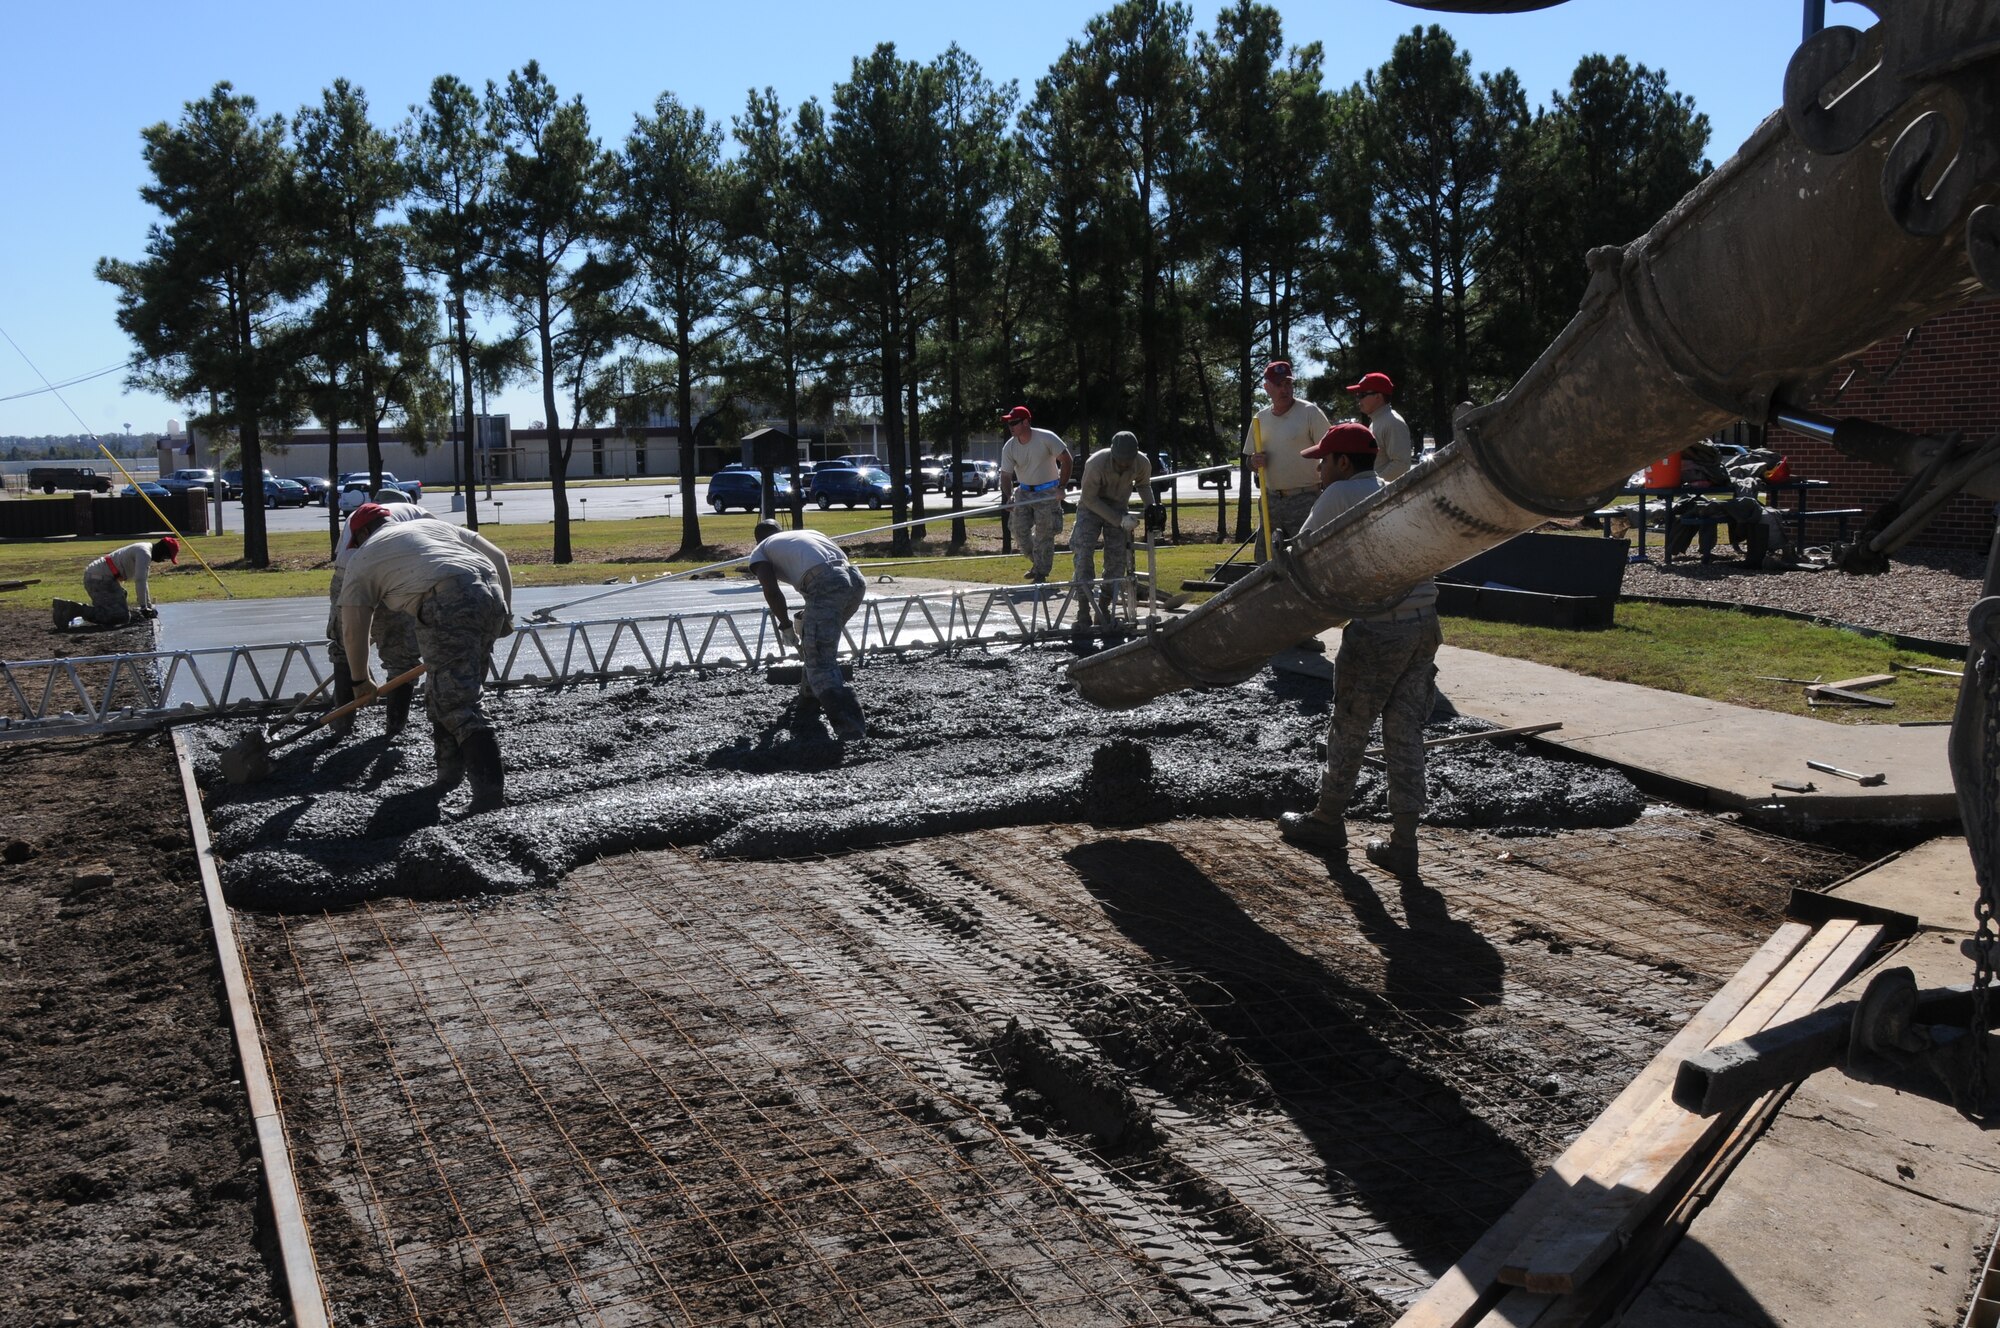 Members of the 567th Rapid Engineers Deployable Heavy Operations Repair Squadron Engineers (RED HORSE) Squadron (RHS) replace a gravel parking area with a concrete parking lot at Ebbing Air National Guard Base, Fort Smith, Ark., Nov. 6, 2014.The 567th RHS ventured to Ebbing Air National Guard Base to retrain on its RED HORSE capabilities with the 188th Civil Engineering Squadron. The 567th is an Air Force Reserve unit based at Seymour Johnson Air Force Base, N.C. (U.S. Air National Guard photo by Airman 1st Class Cody Martin/Released)